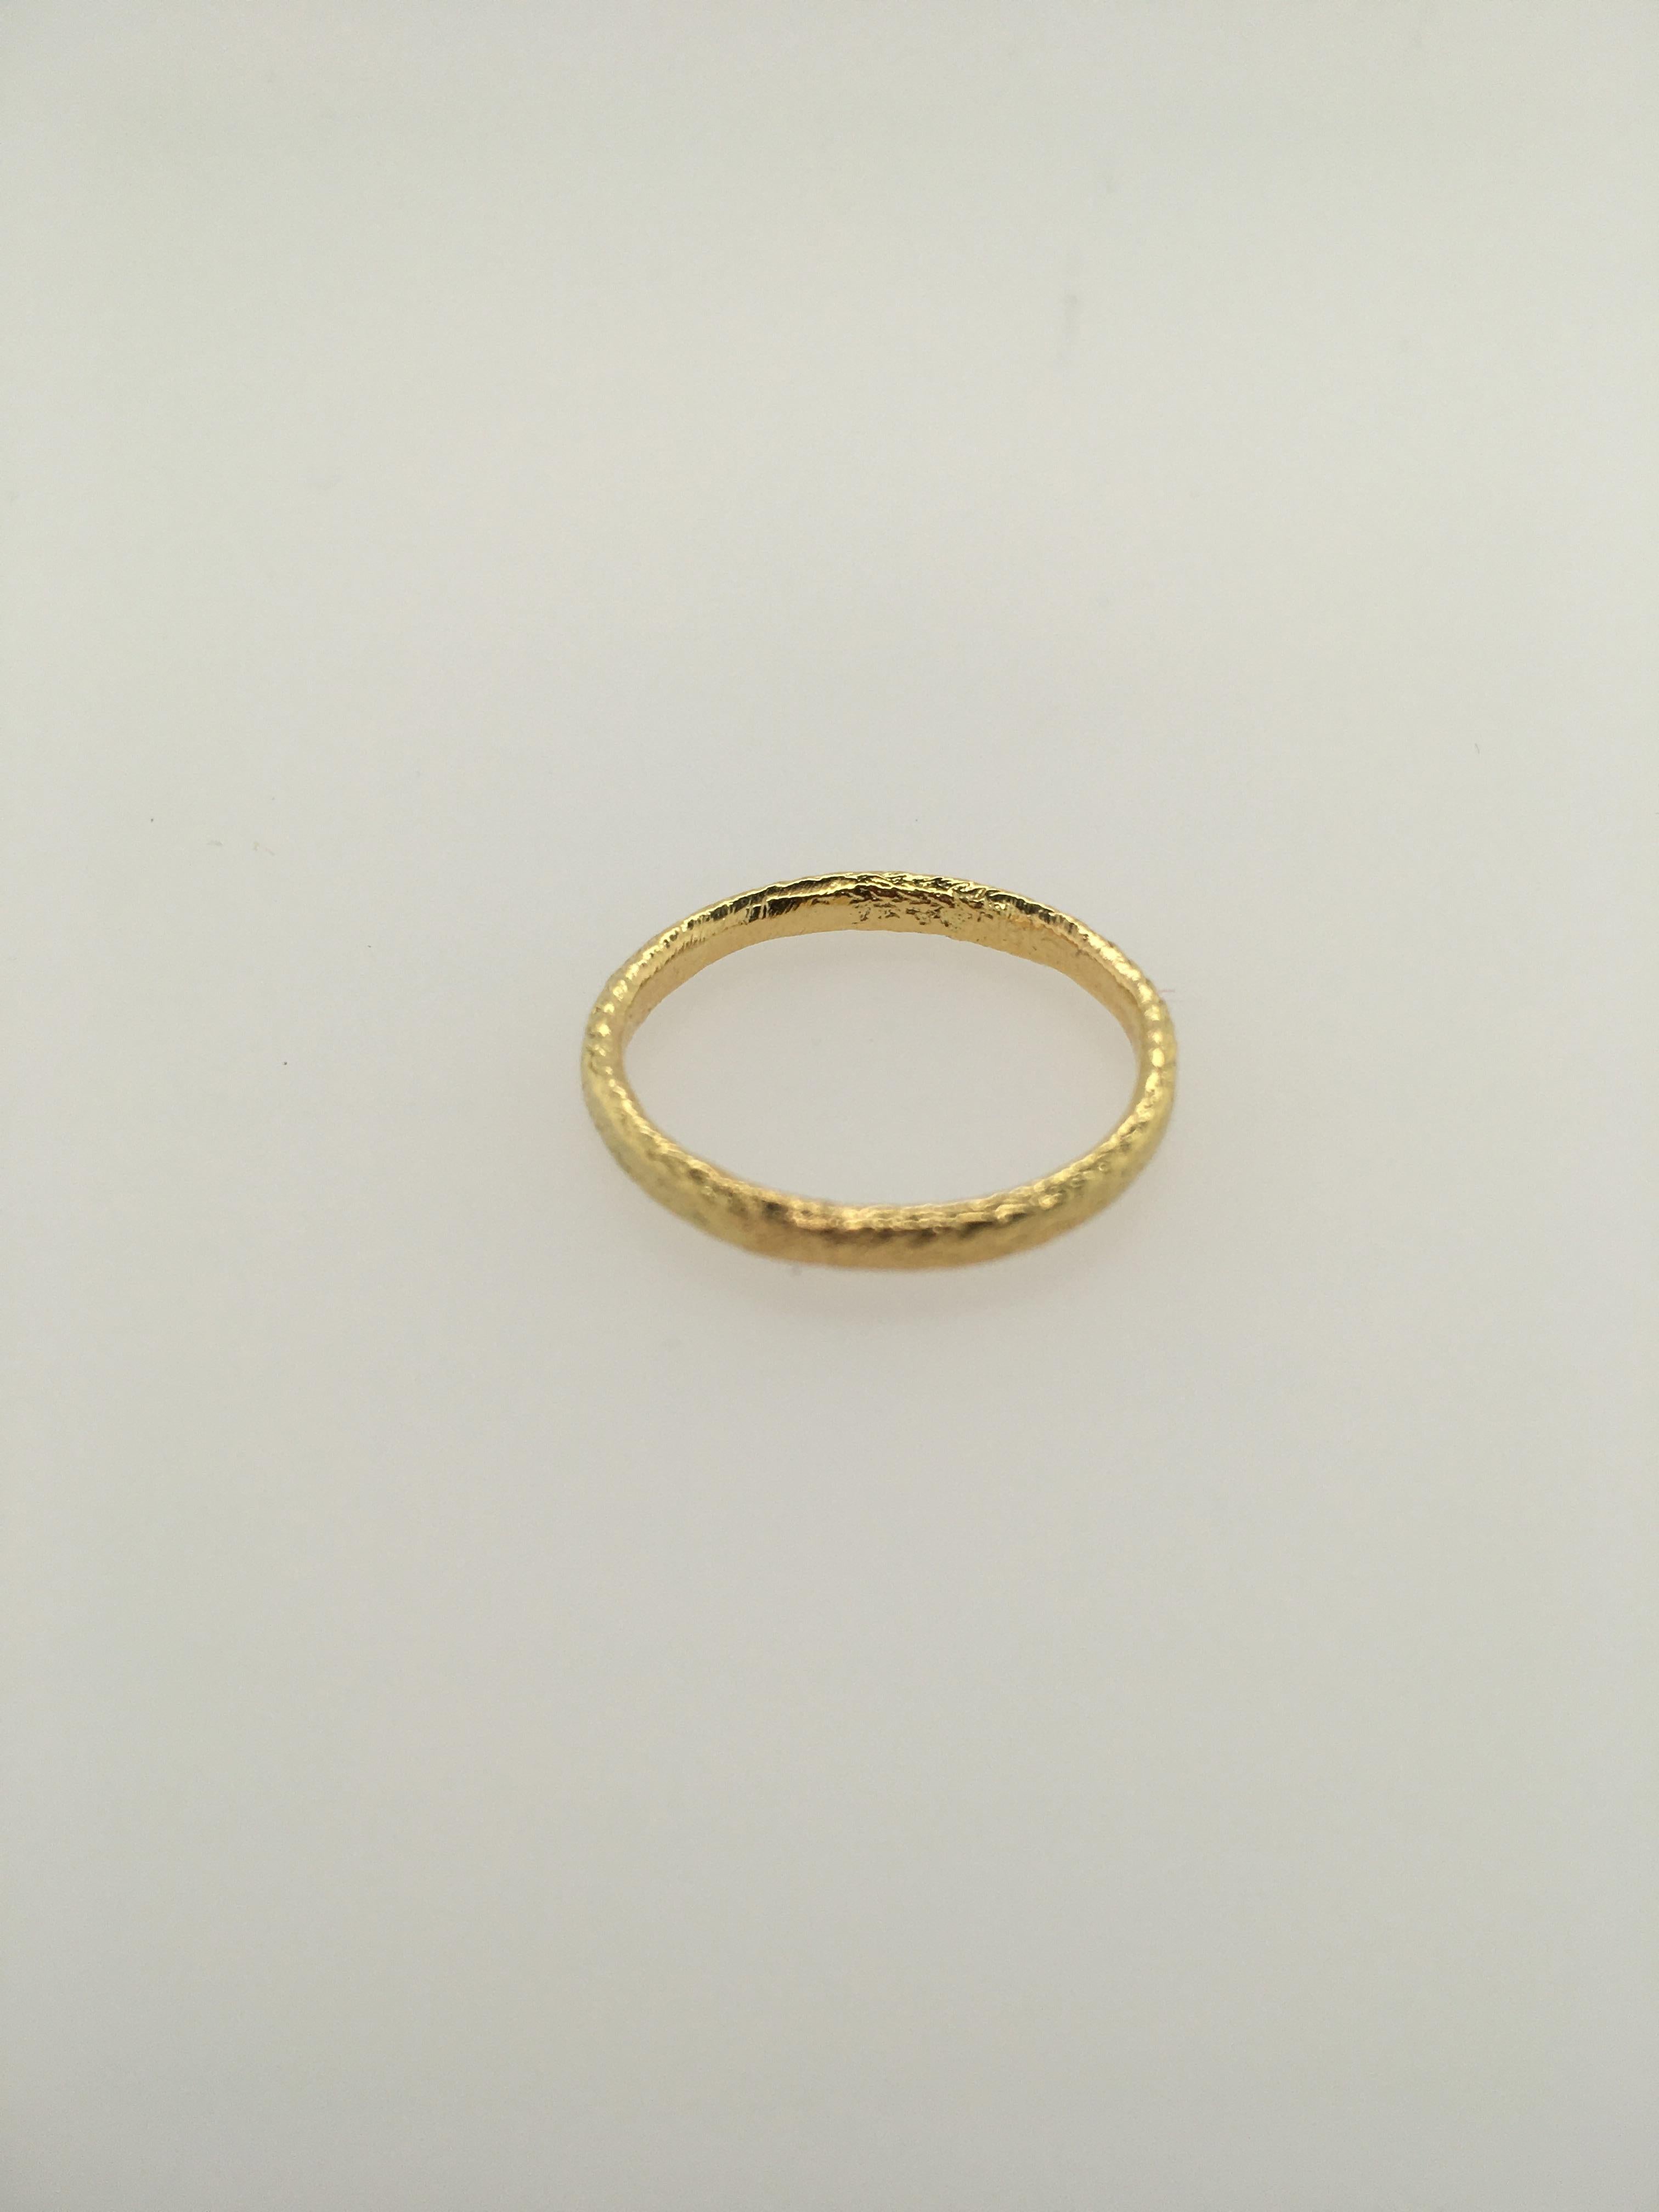 18K Yellow Gold hand-textured, slightly domed wedding band by well-known Maine jeweler Patricia Daunis.  Band measures 2.5 mm.  Ring size is 6.5.  This simple, striking band is part of a custom Daunis ATUIK collection of 18K textured rings. It